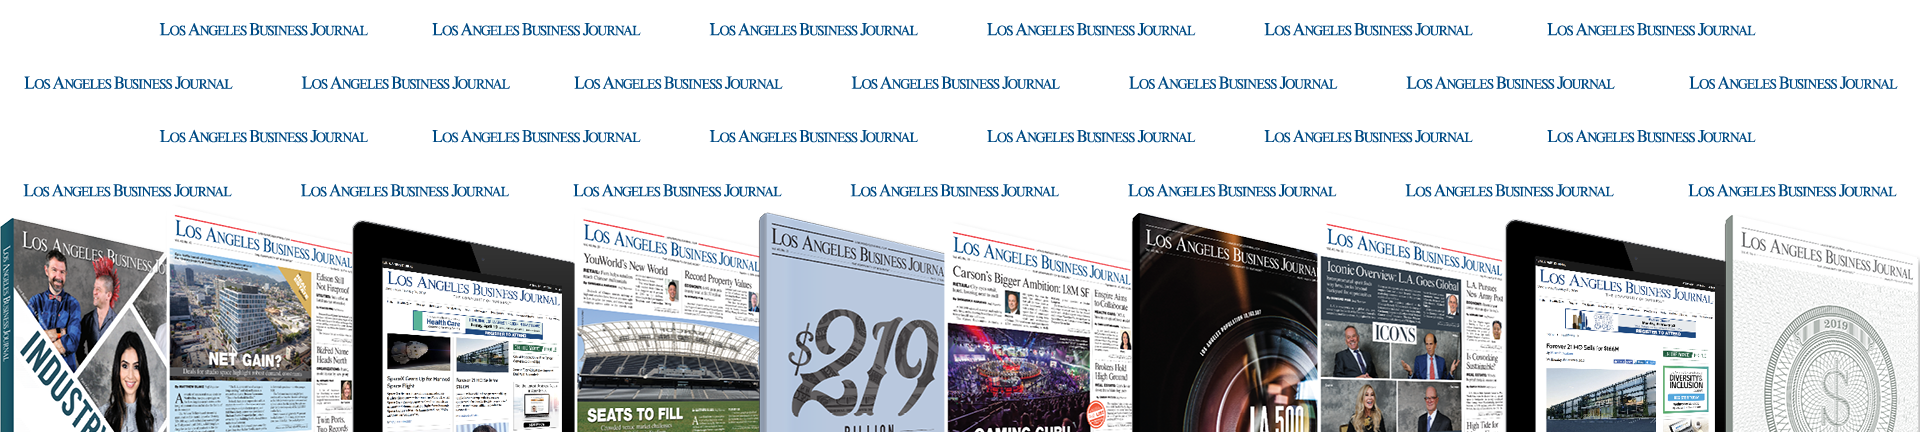 Los Angeles Business Journal Media Wall Banner